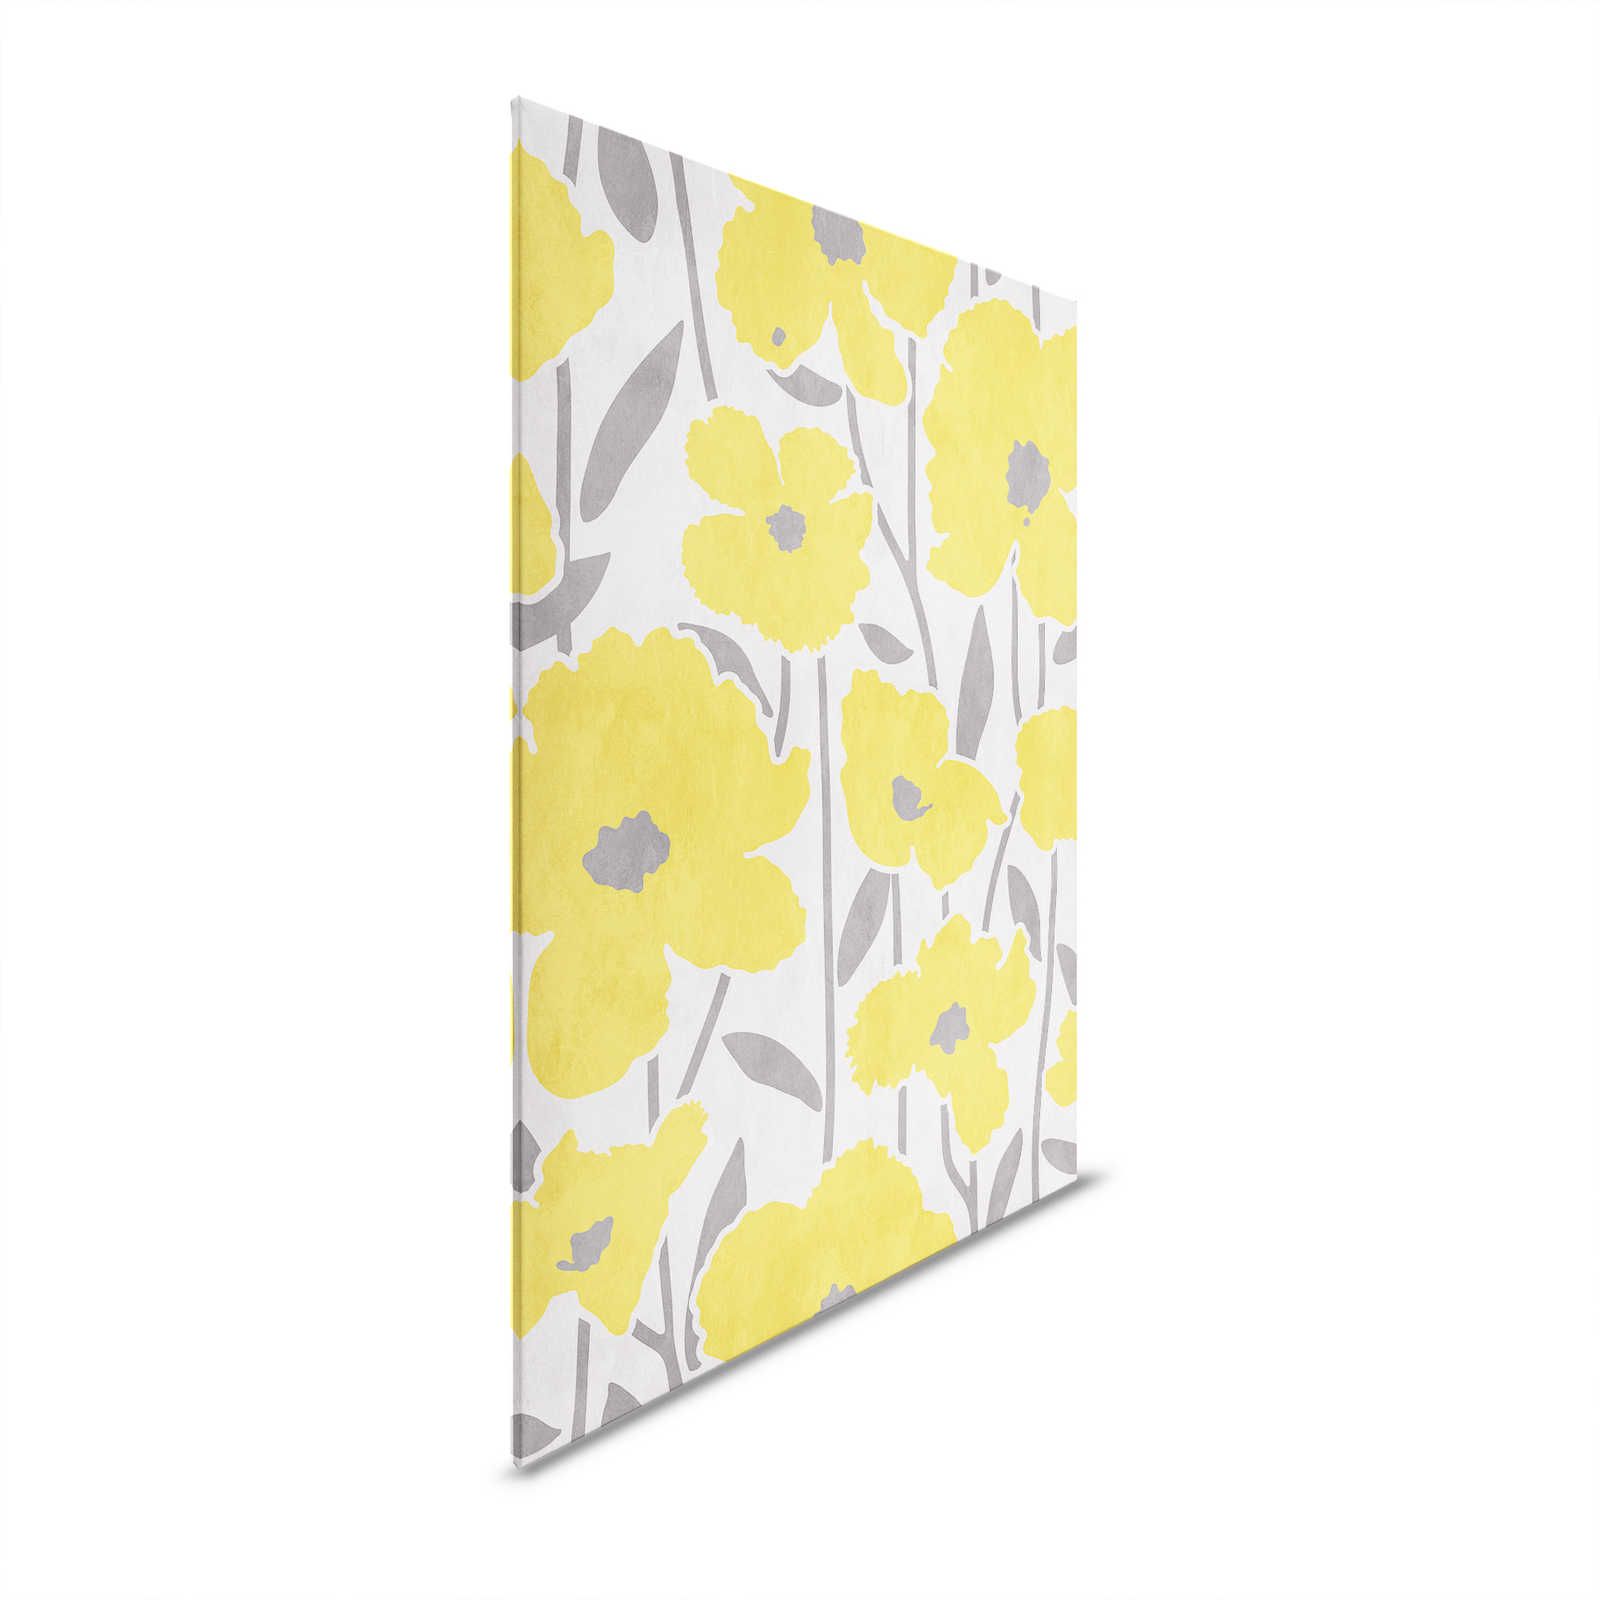 Flower Market 4 - Floral Canvas Painting Yellow & Grey with Rendered Effect - 0.60 m x 0.80 m
